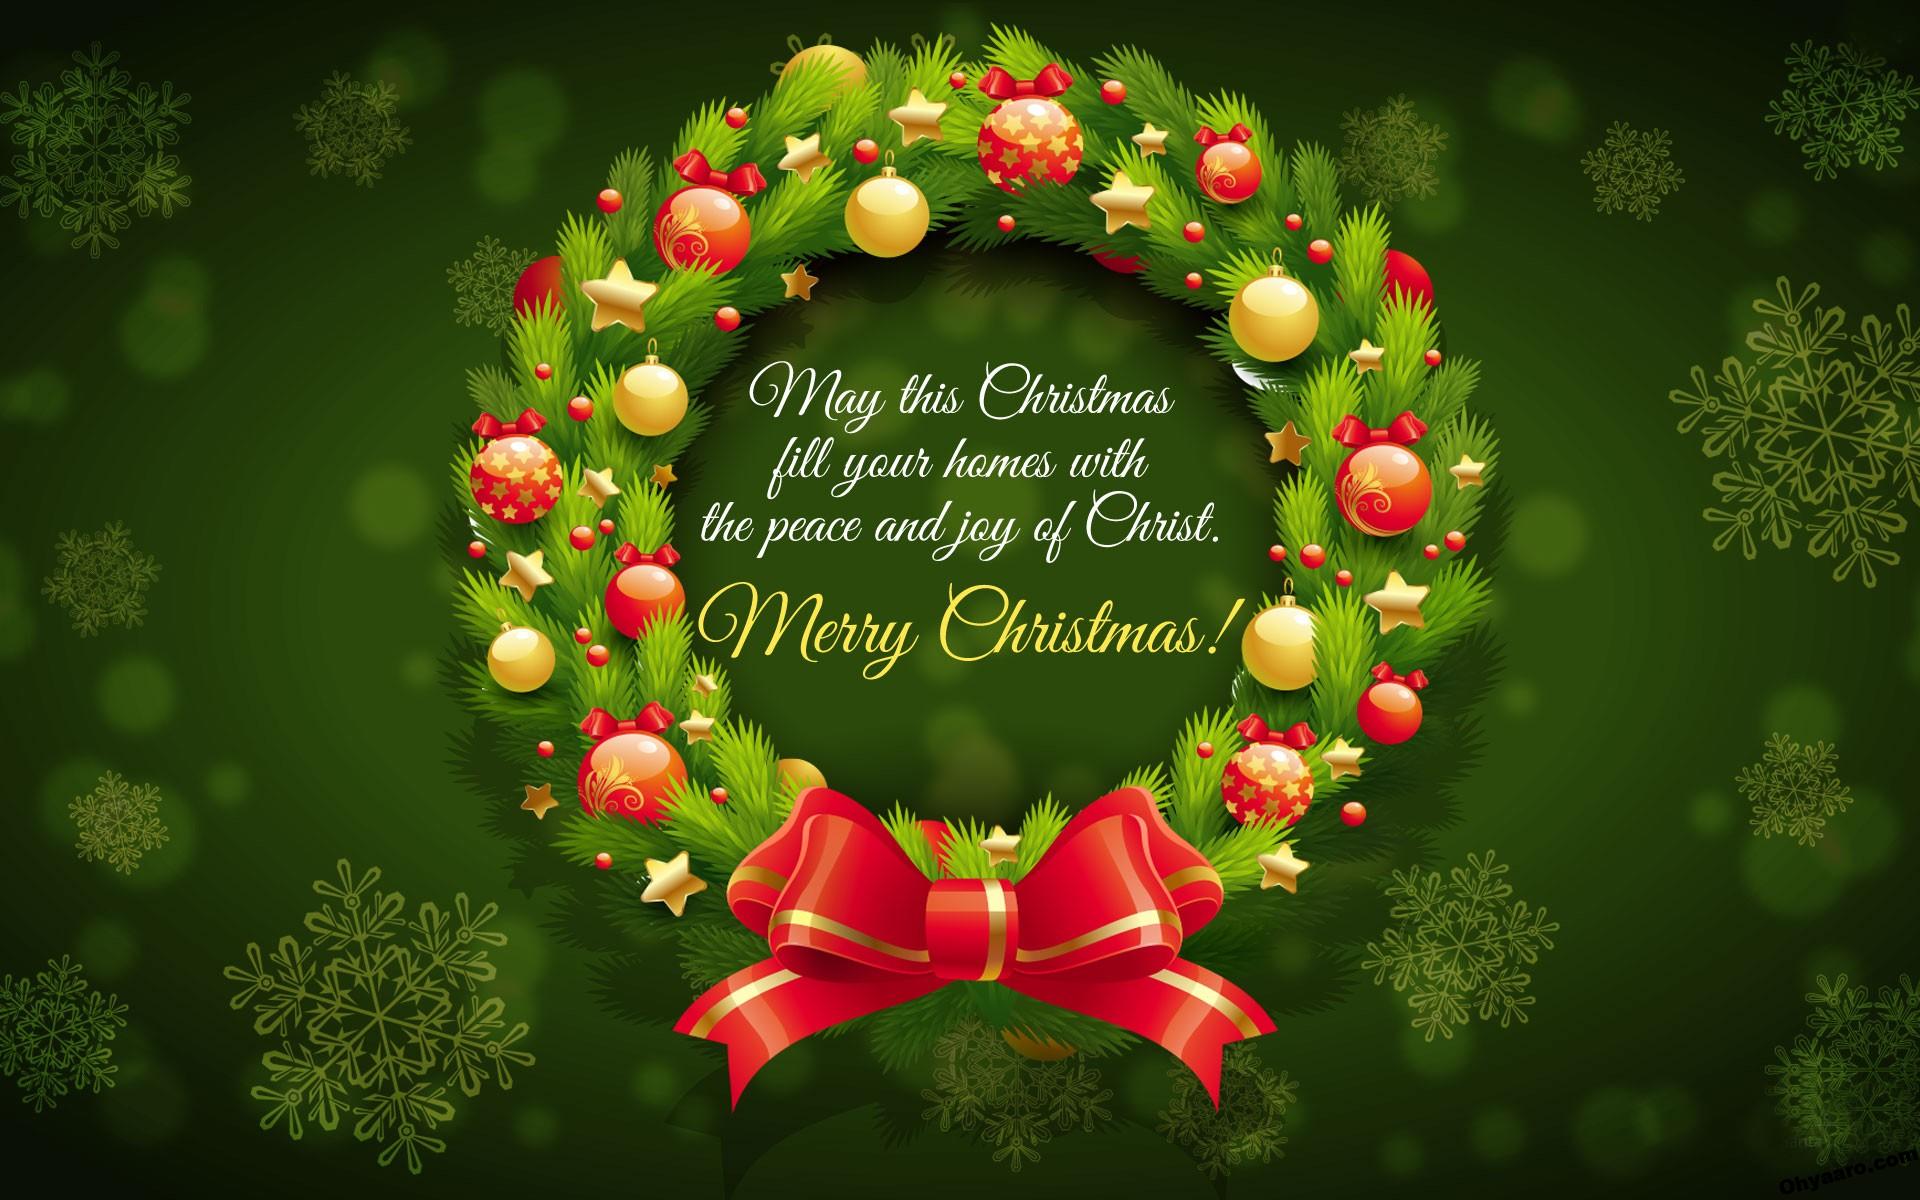 Merry Christmas Wishes Image